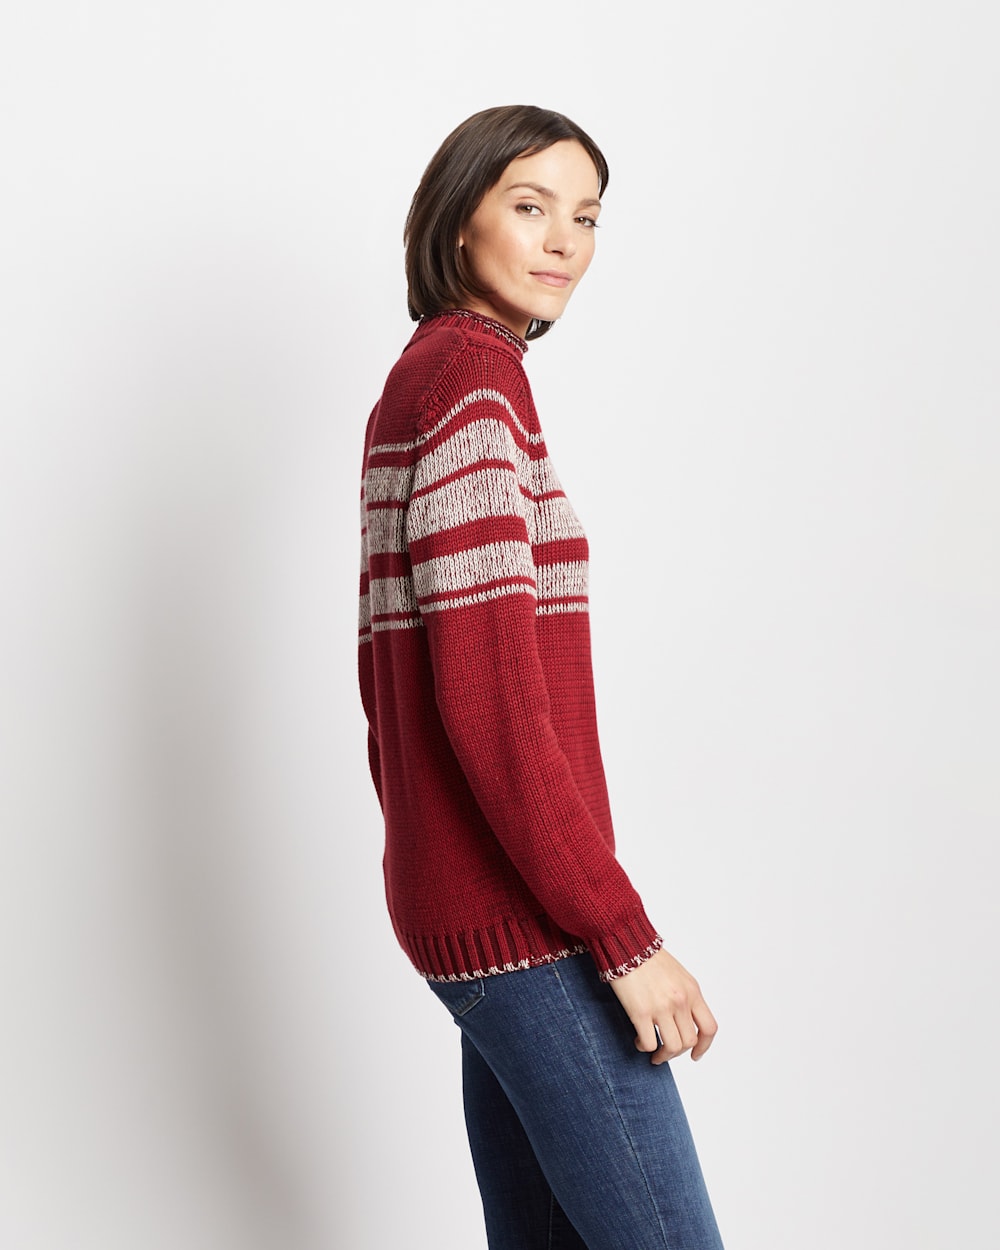 ALTERNATE VIEW OF WOMEN'S MOCKNECK RELAXED-FIT SWEATER IN RED/IVORY image number 4